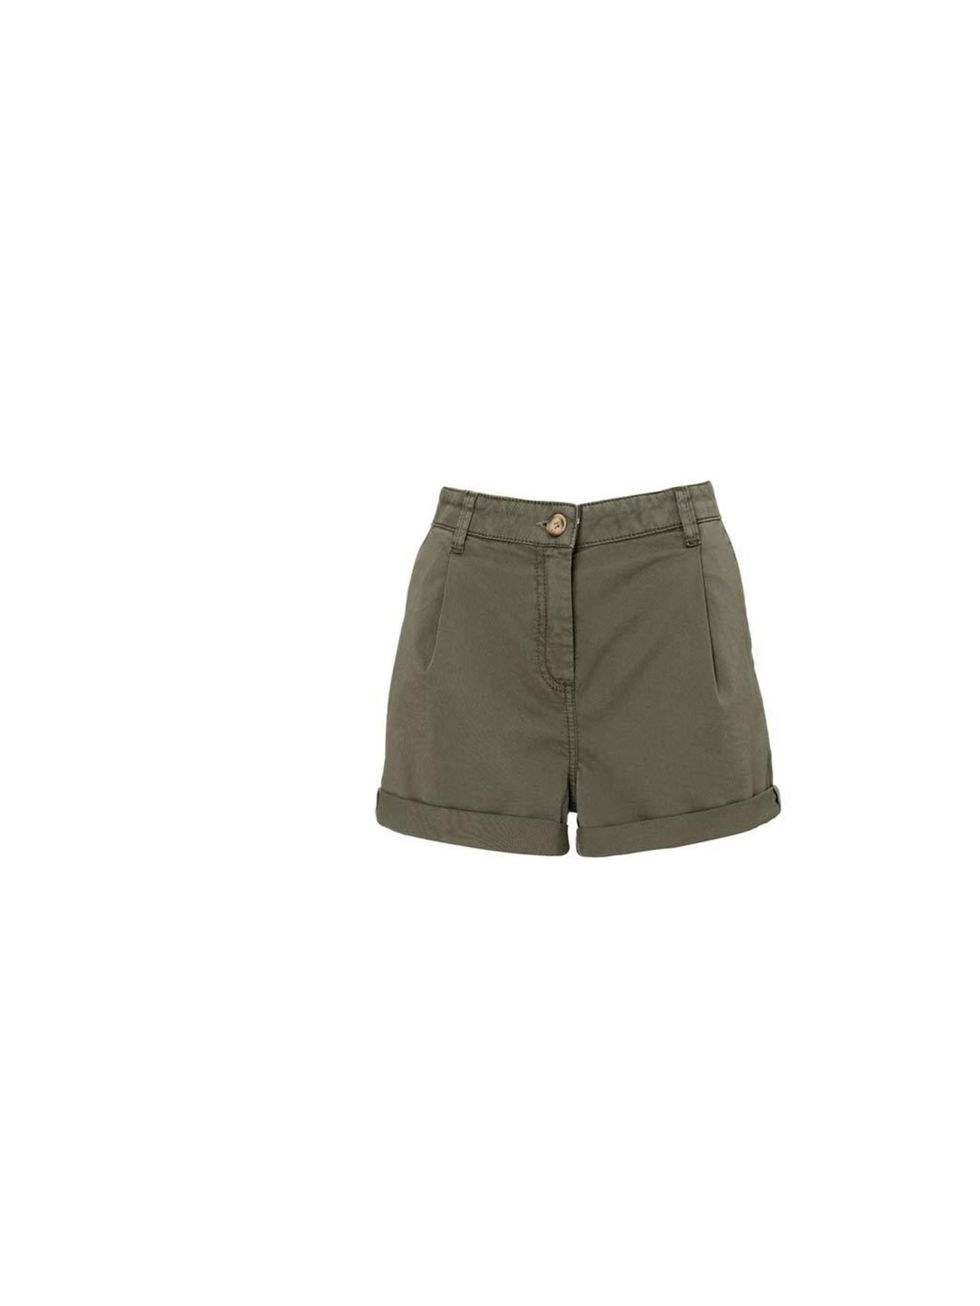 <p>The relaxed, boyish fit of these khaki shorts makes for easy summer style...  <a href="http://www.whistles.co.uk/search?performSearch=true&productsPerPage=60&keywords=shorts">Whistles</a> shorts, £65</p>